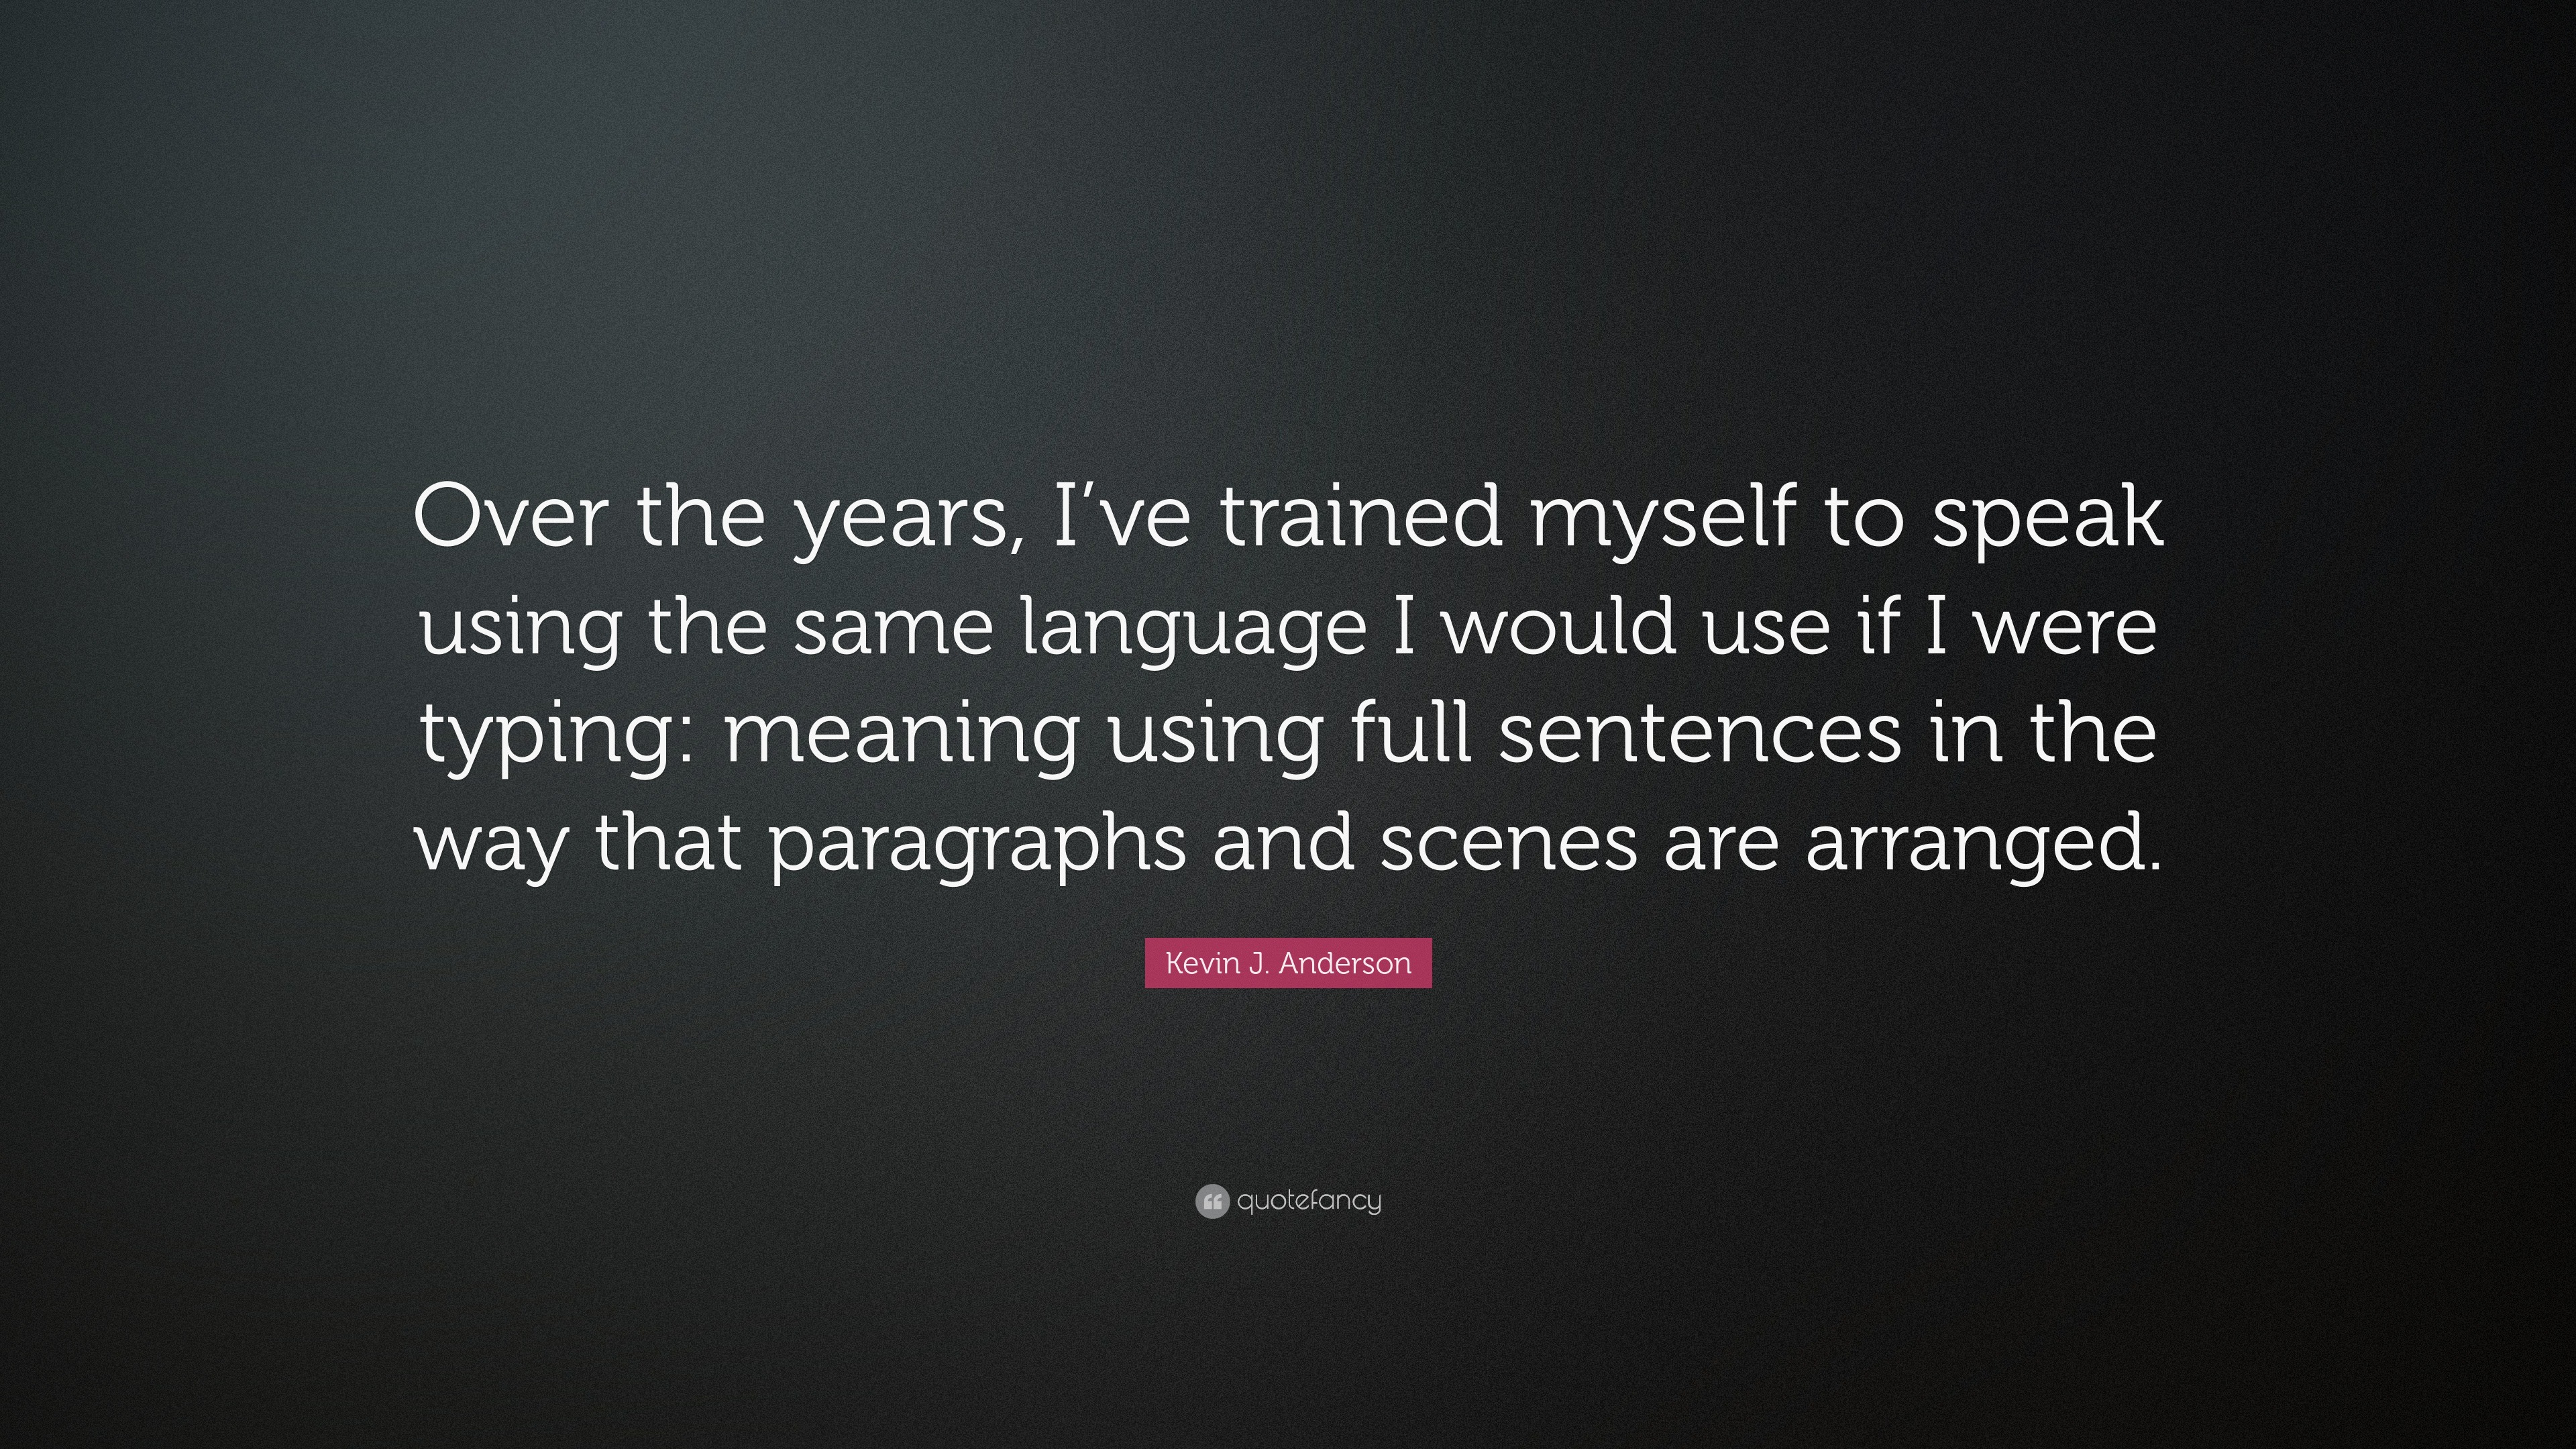 Kevin J Anderson Quote Over The Years I Ve Trained Myself To Speak Using The Same Language I Would Use If I Were Typing Meaning Using Full Se